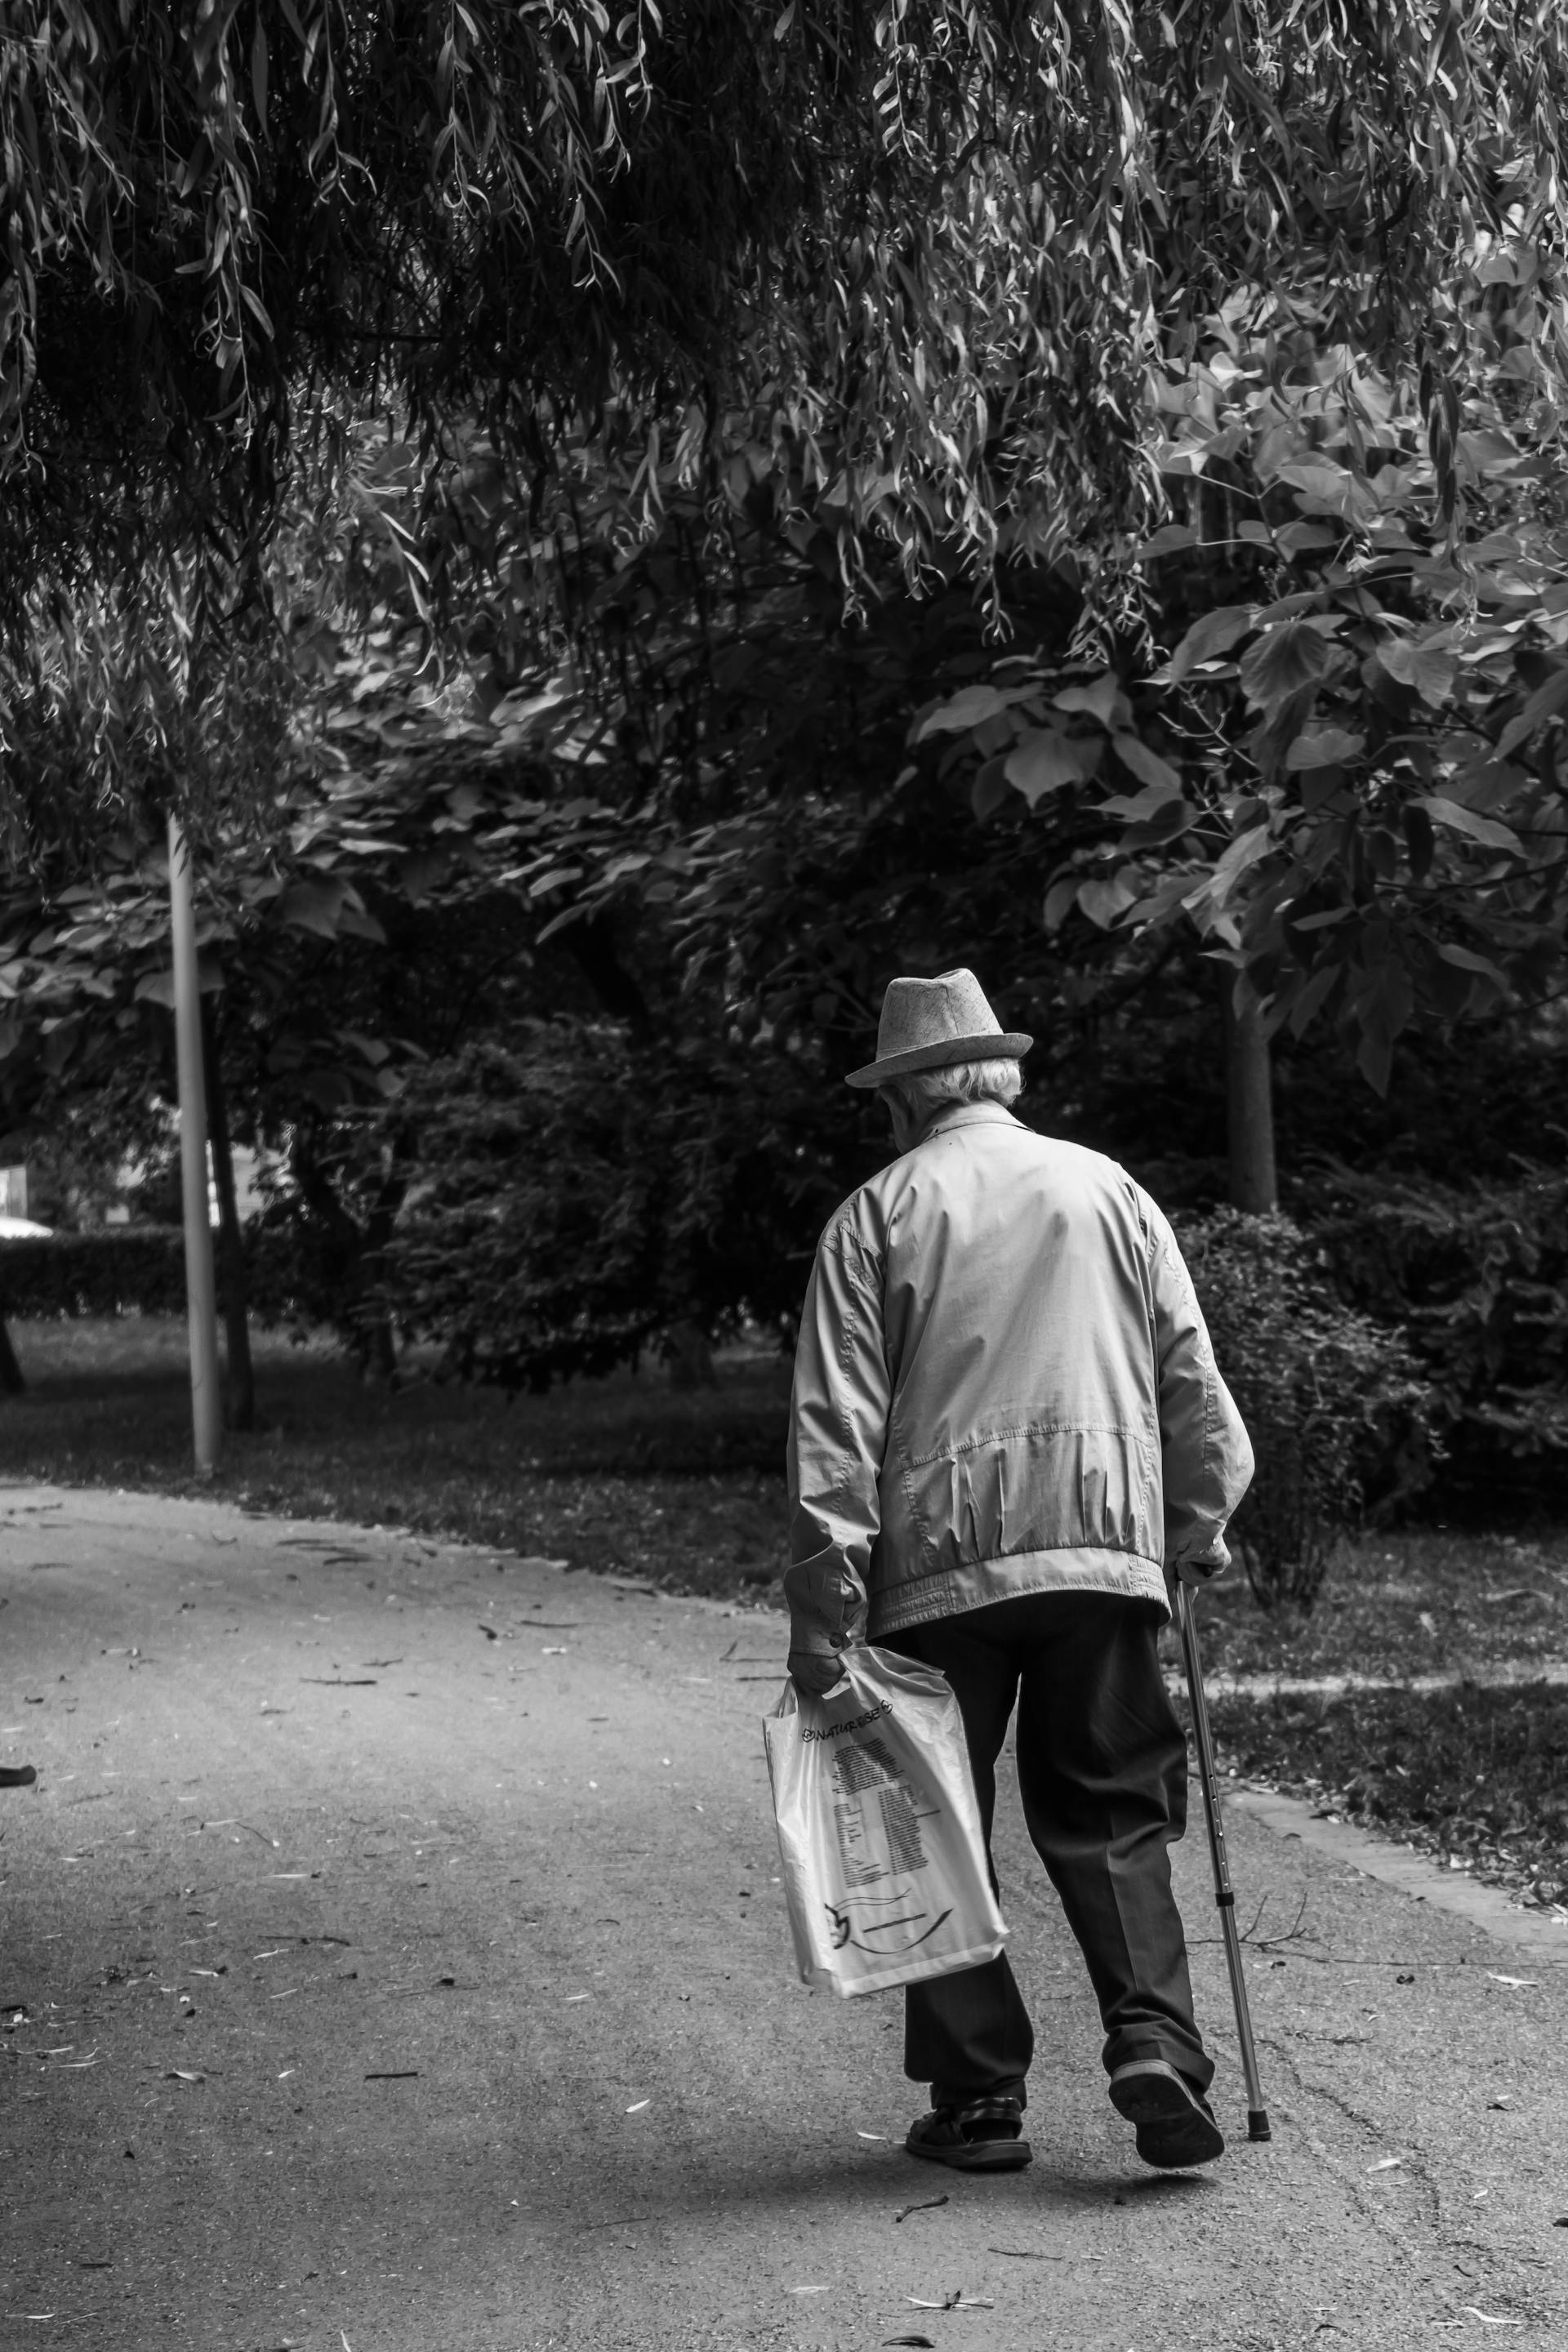 An old man walking with a walking stick | Source: Pexels